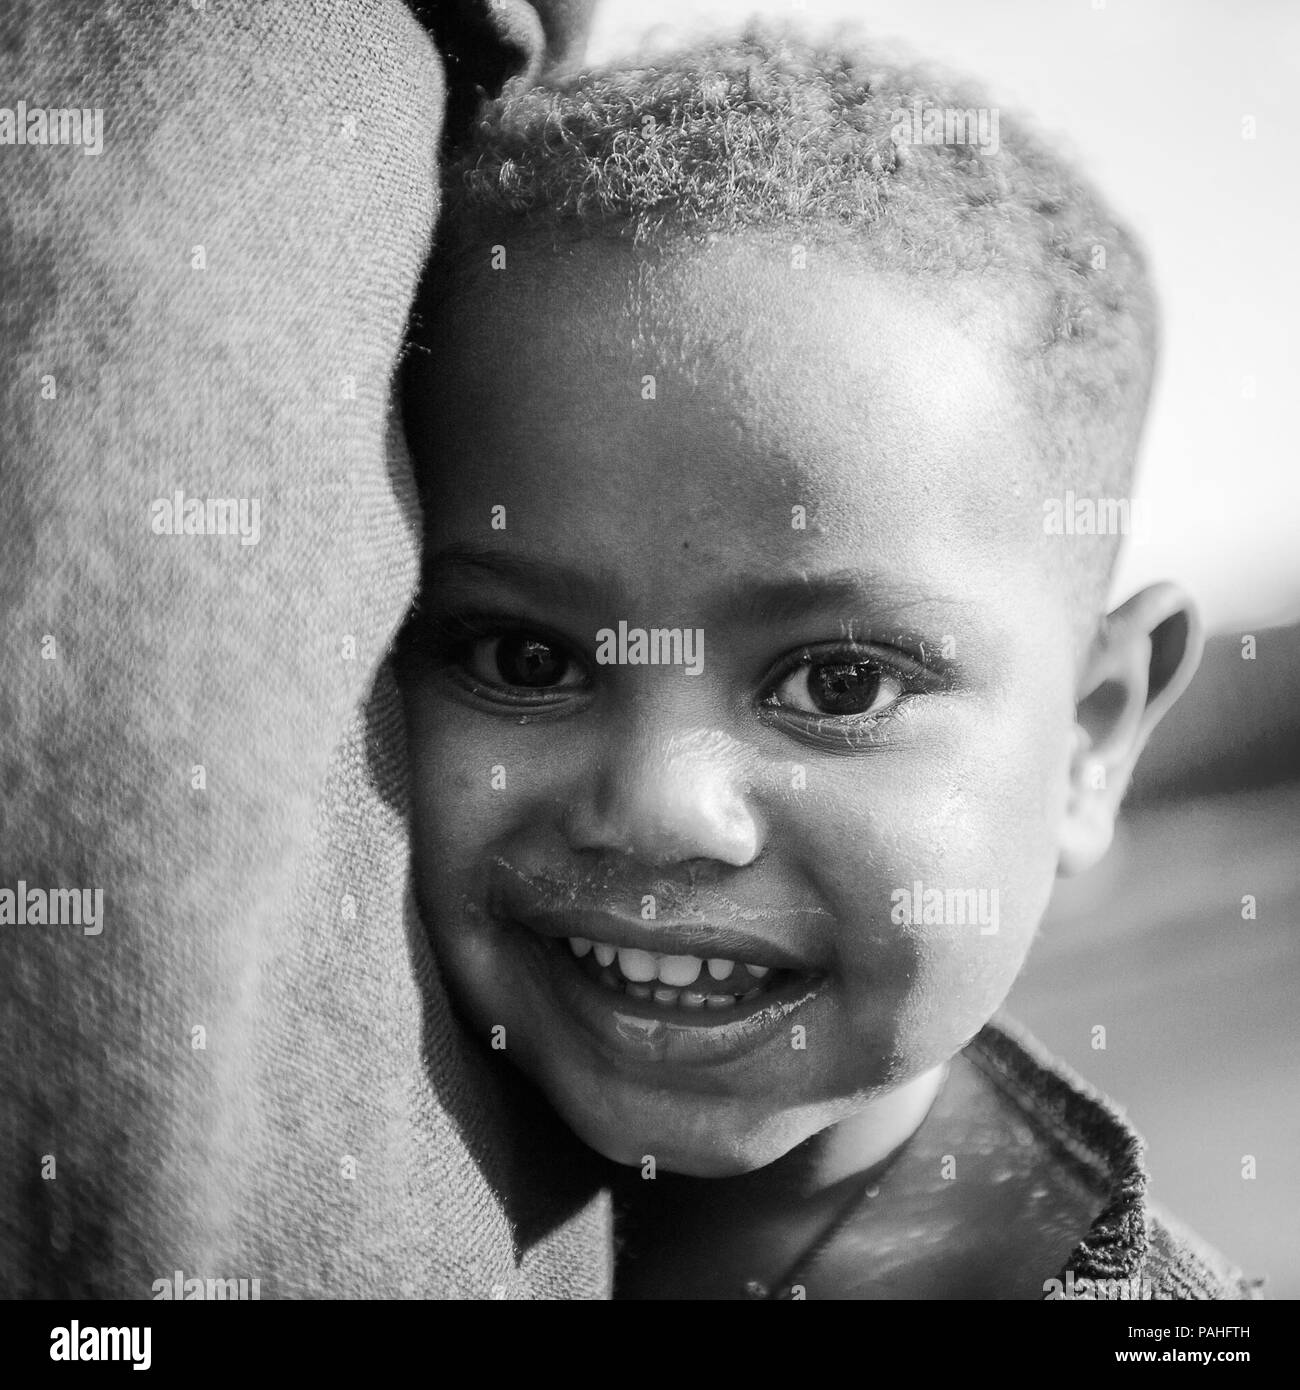 AKSUM, ETHIOPIA - SEP 30, 2011: Portrait of an unidentified Ethiopian little boy near his mother skirt in Ethiopia, Sep.30, 2011. Children in Ethiopia Stock Photo